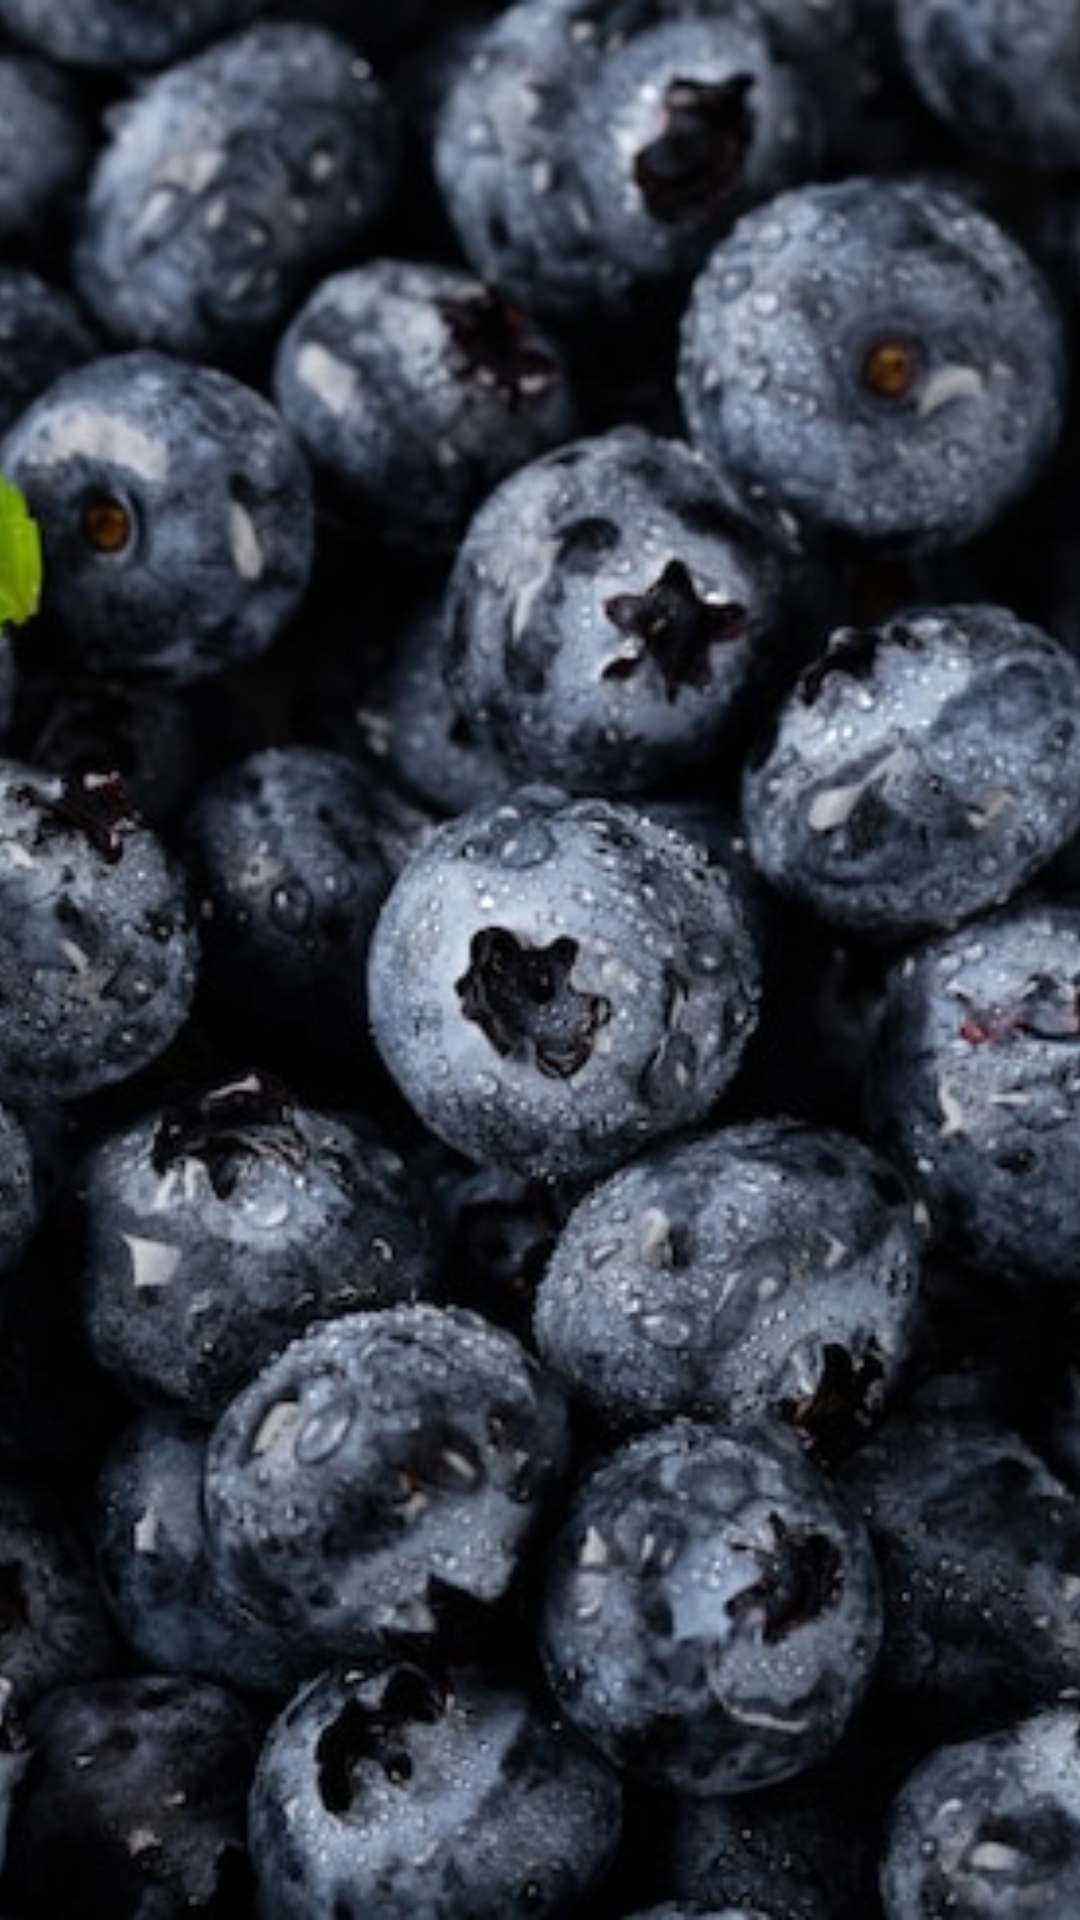  5 health benefits of blueberries that you should know